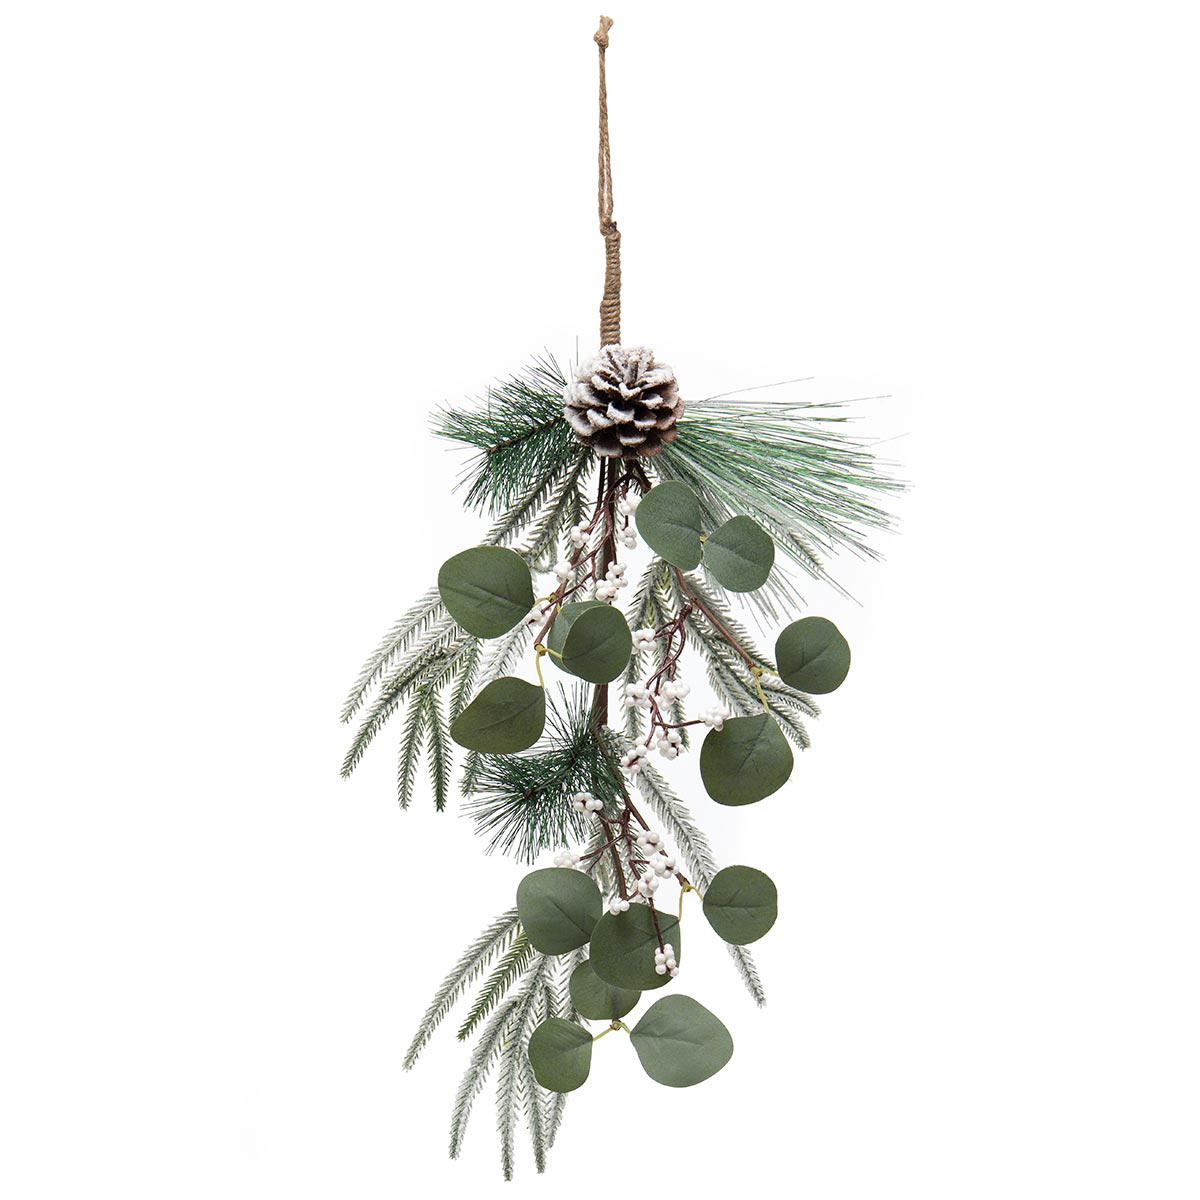 !SNOWBERRY PINE DROP GREEN WITH SNOW, WHITE BERRIES f33